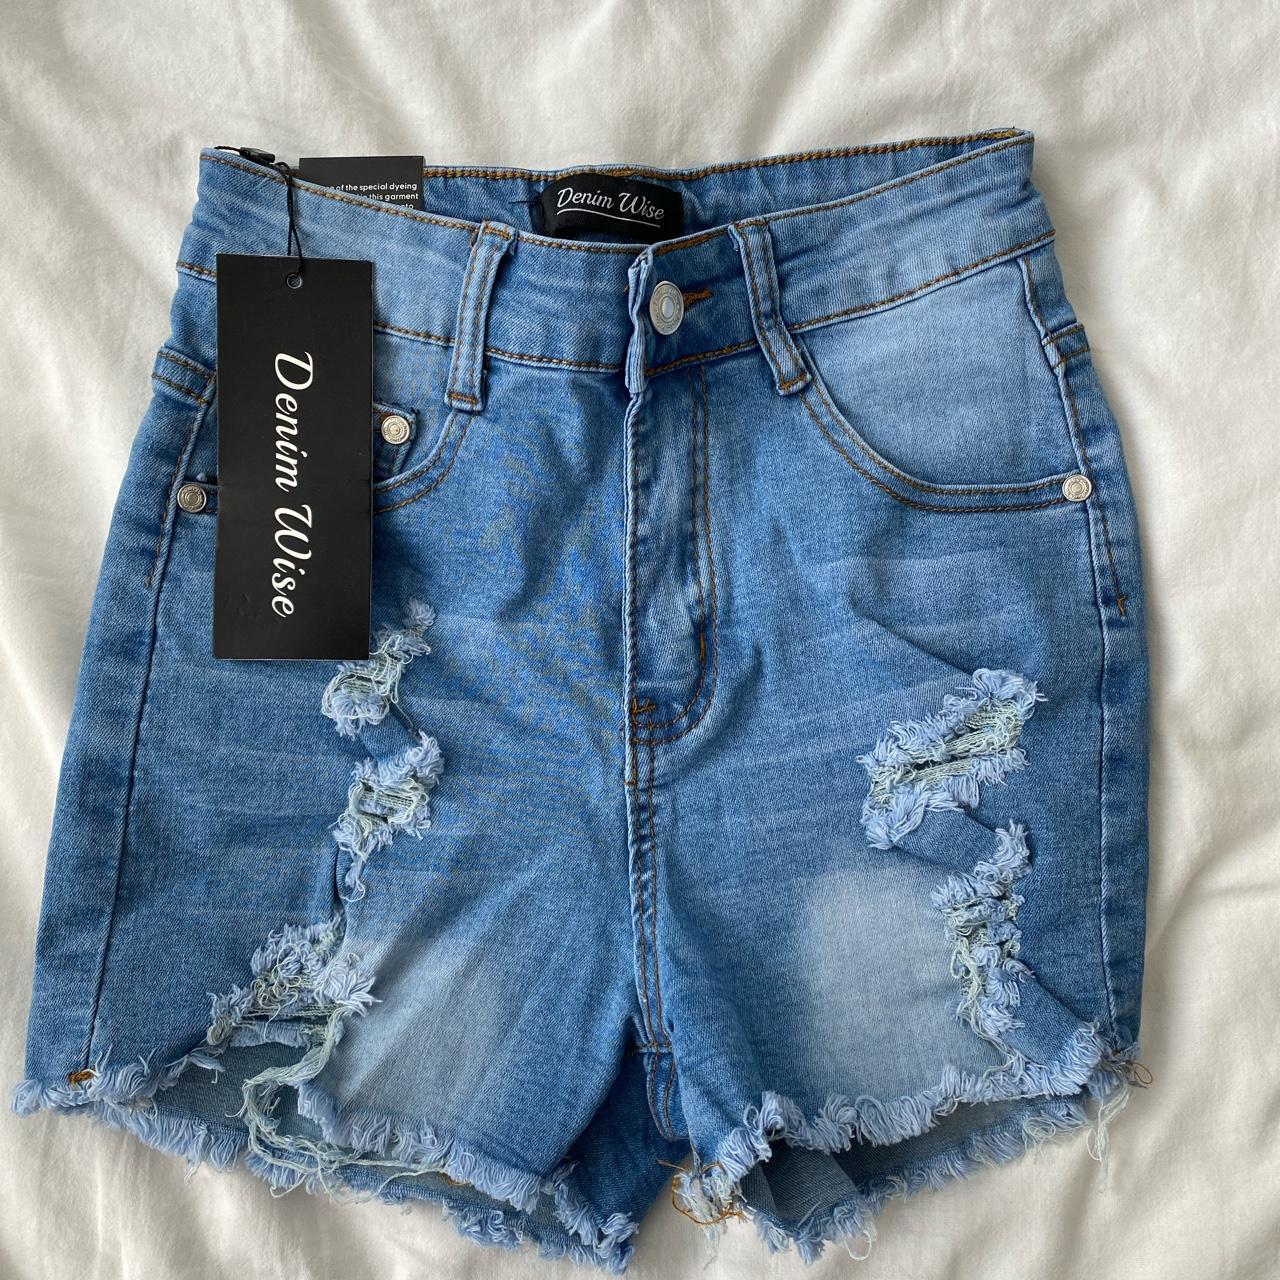 I Saw It First Women's Blue Shorts